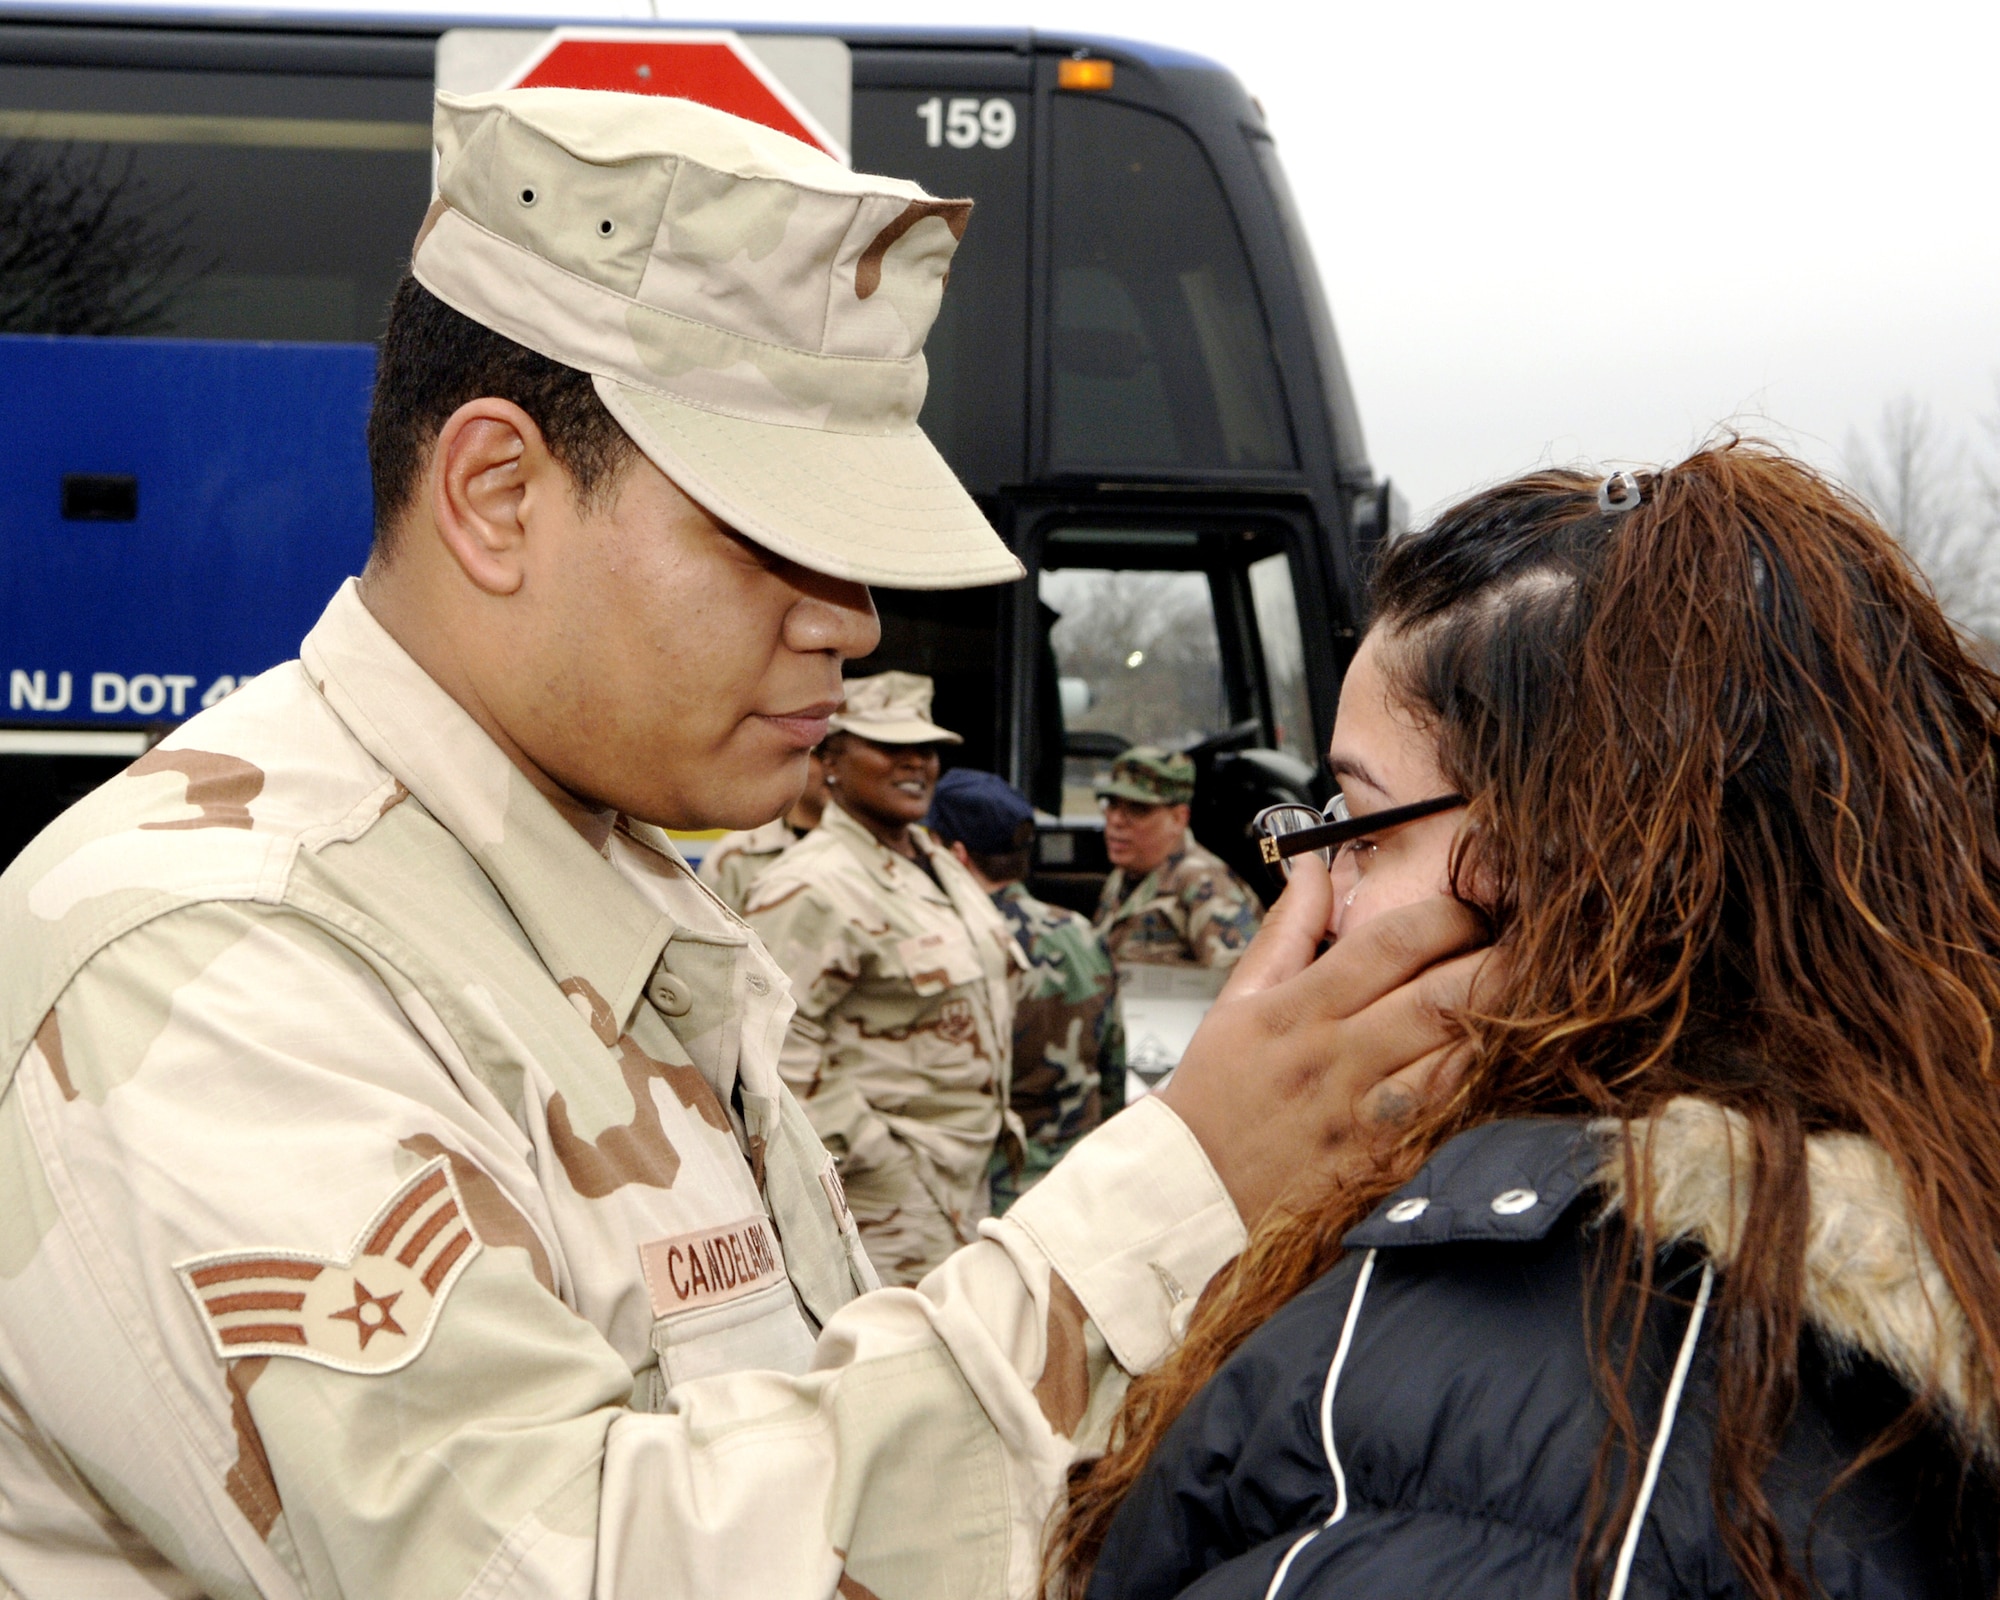 Deployment Farewell: Mastering the Art of Saying Goodbye